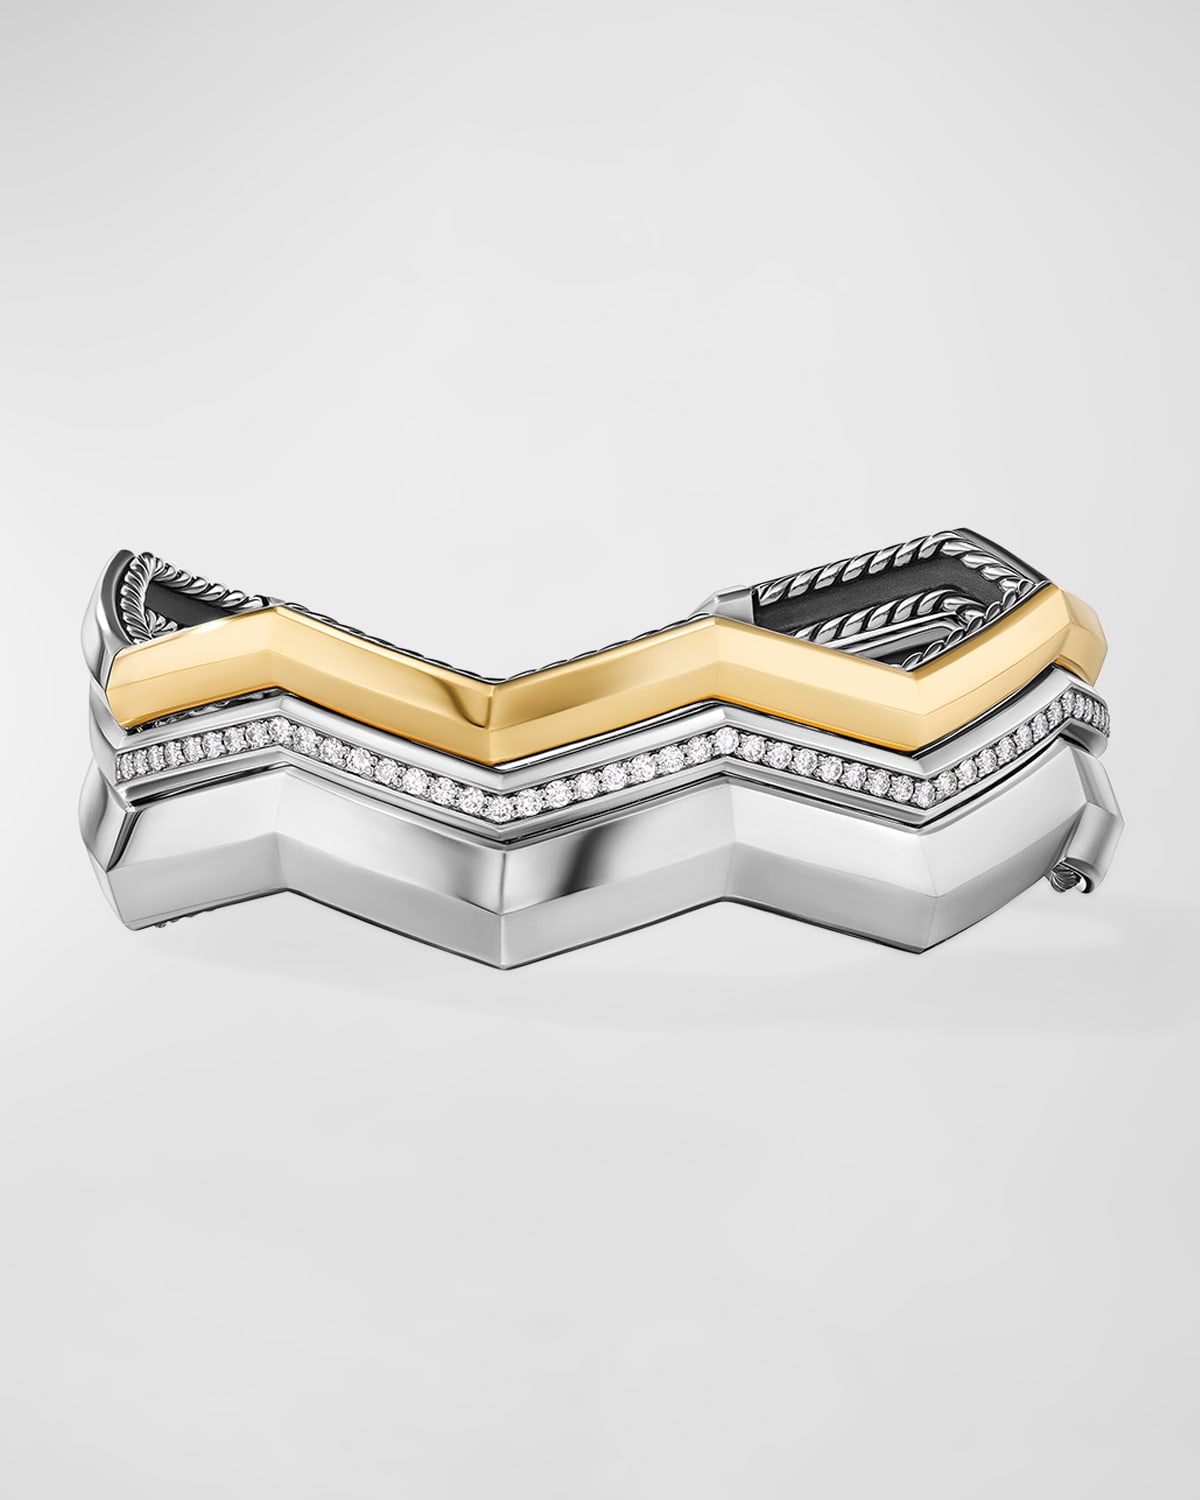 Stax 3 Row Cuff Bracelet with Diamonds in 18K Gold and Silver, 17mm